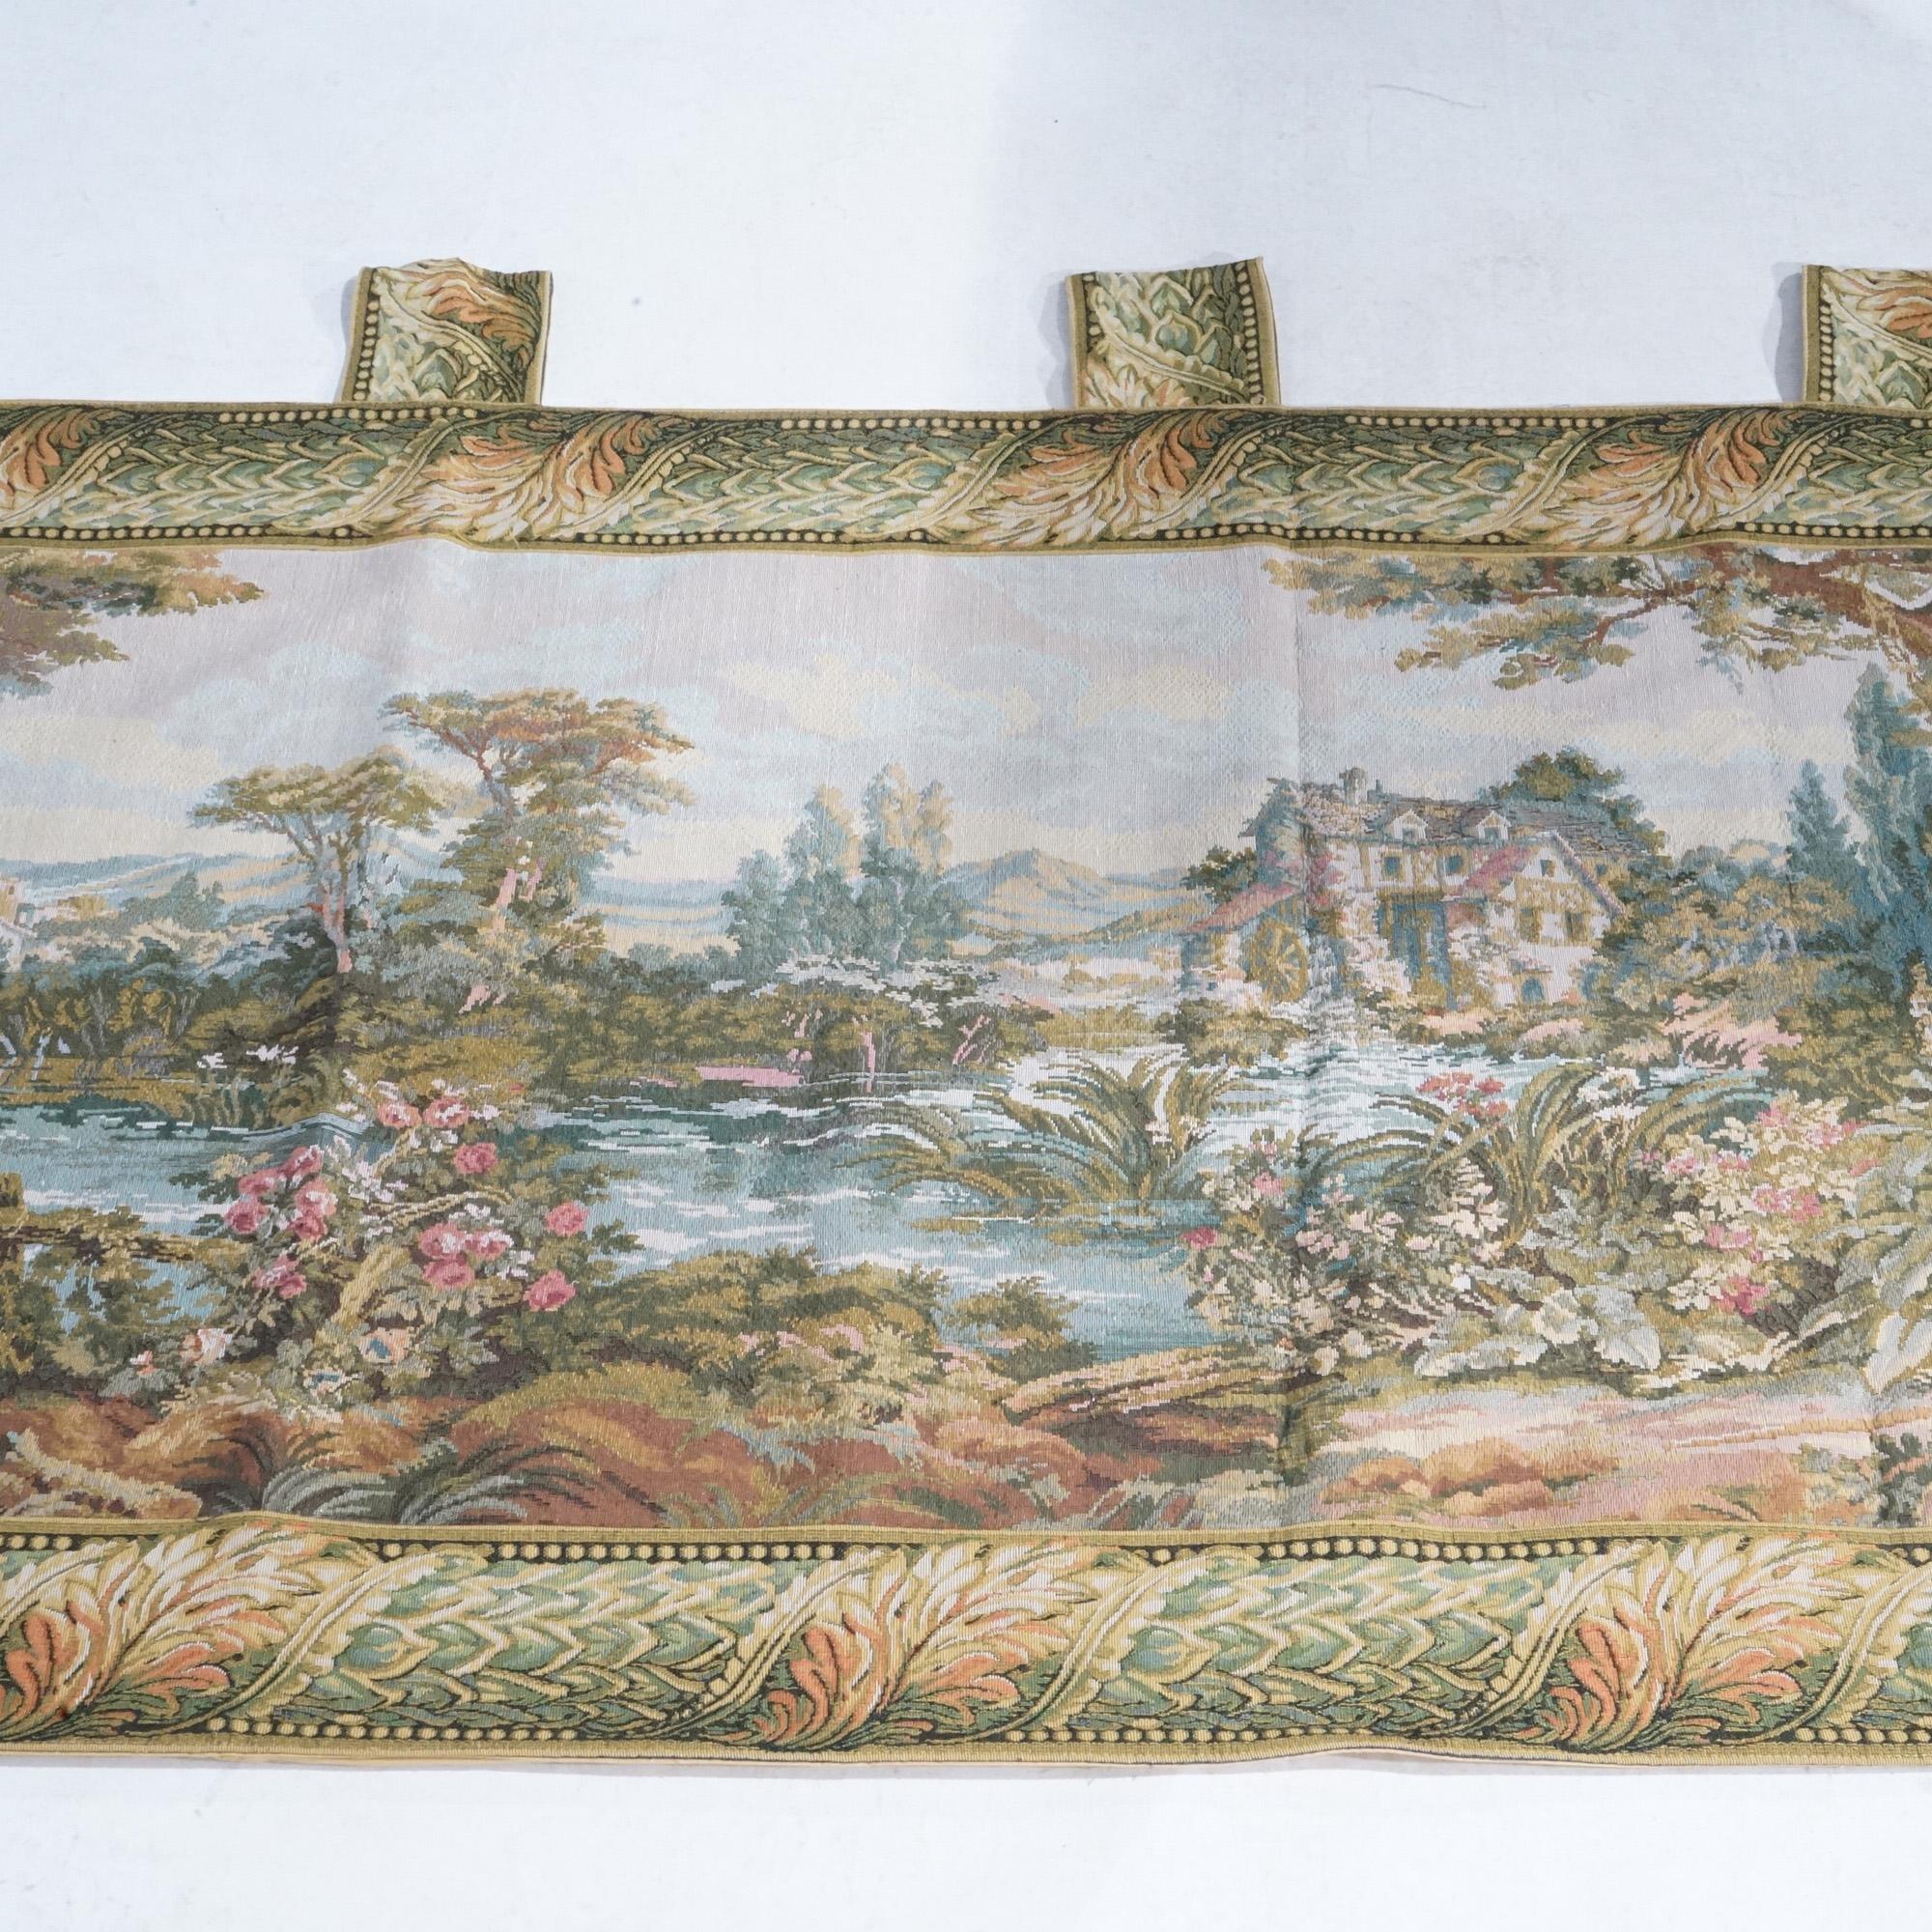 Textile Contemporary Greco-Roman Scenic Countryside Wall Tapestry with Cottage 20th For Sale